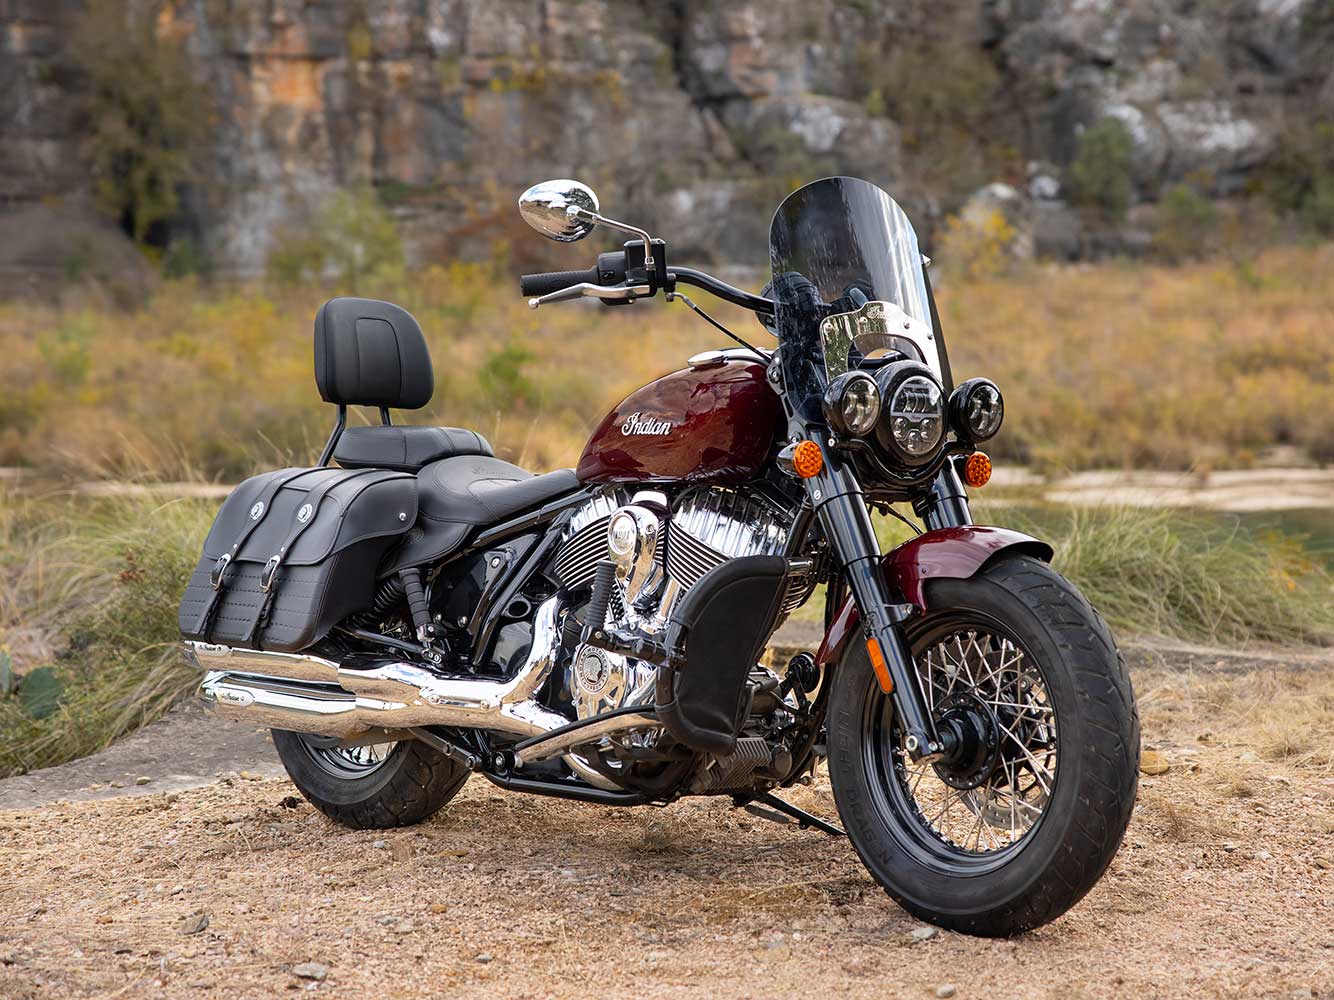 Experience the thrill of adventure with our Indian motorcycle showcased in a scenic mountain desert trail